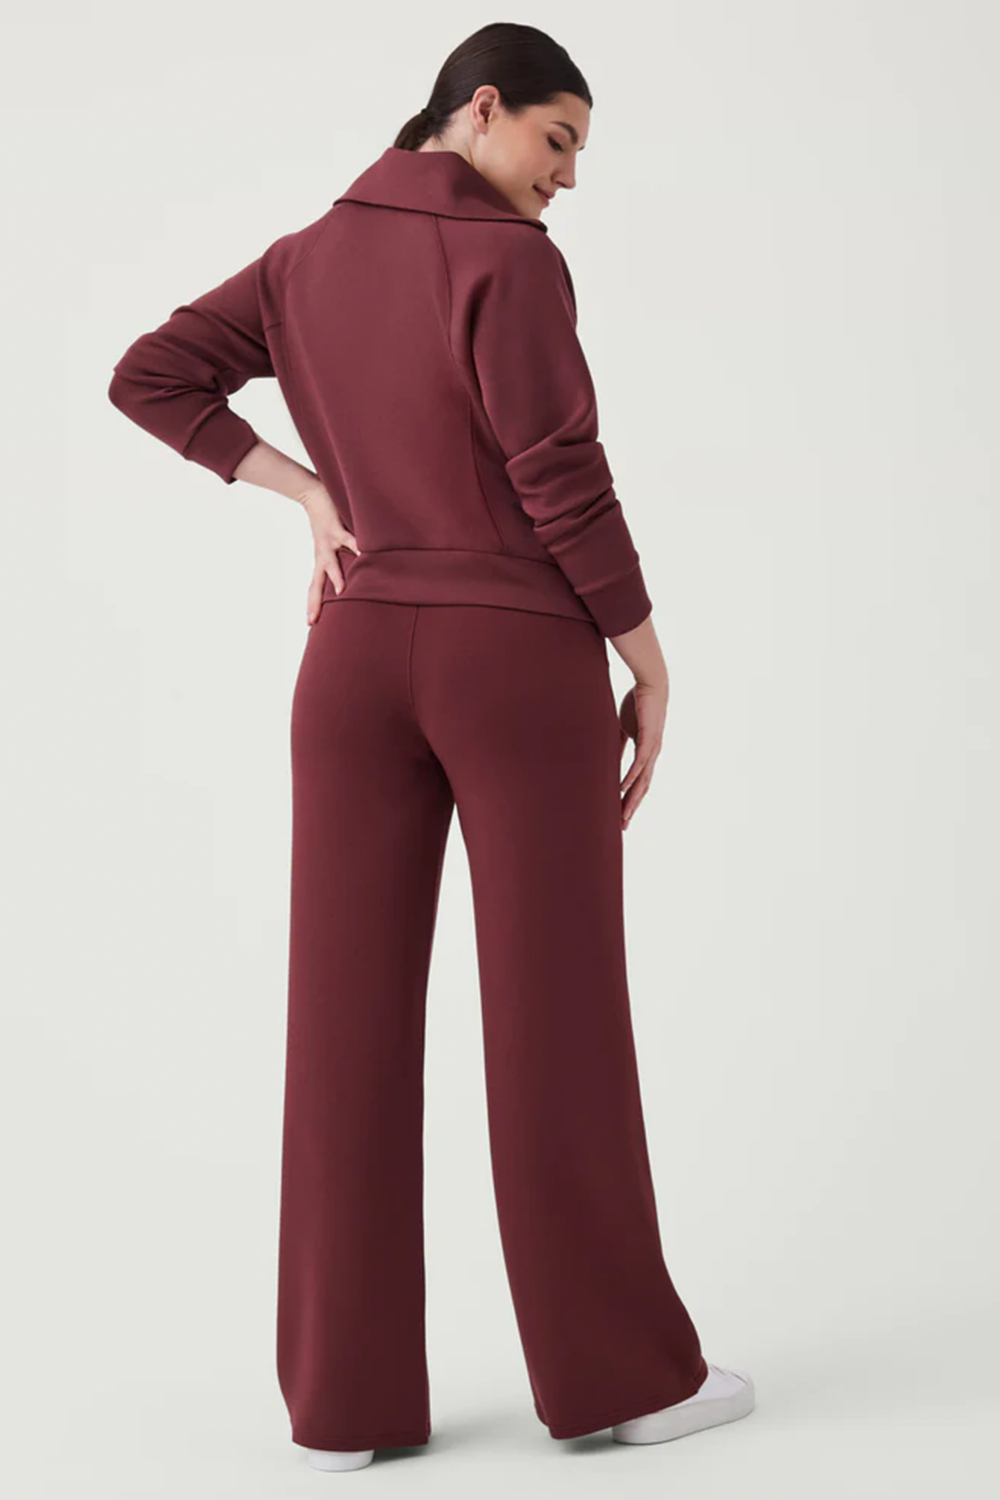 AirEssentials Wide Leg Pant in Spice